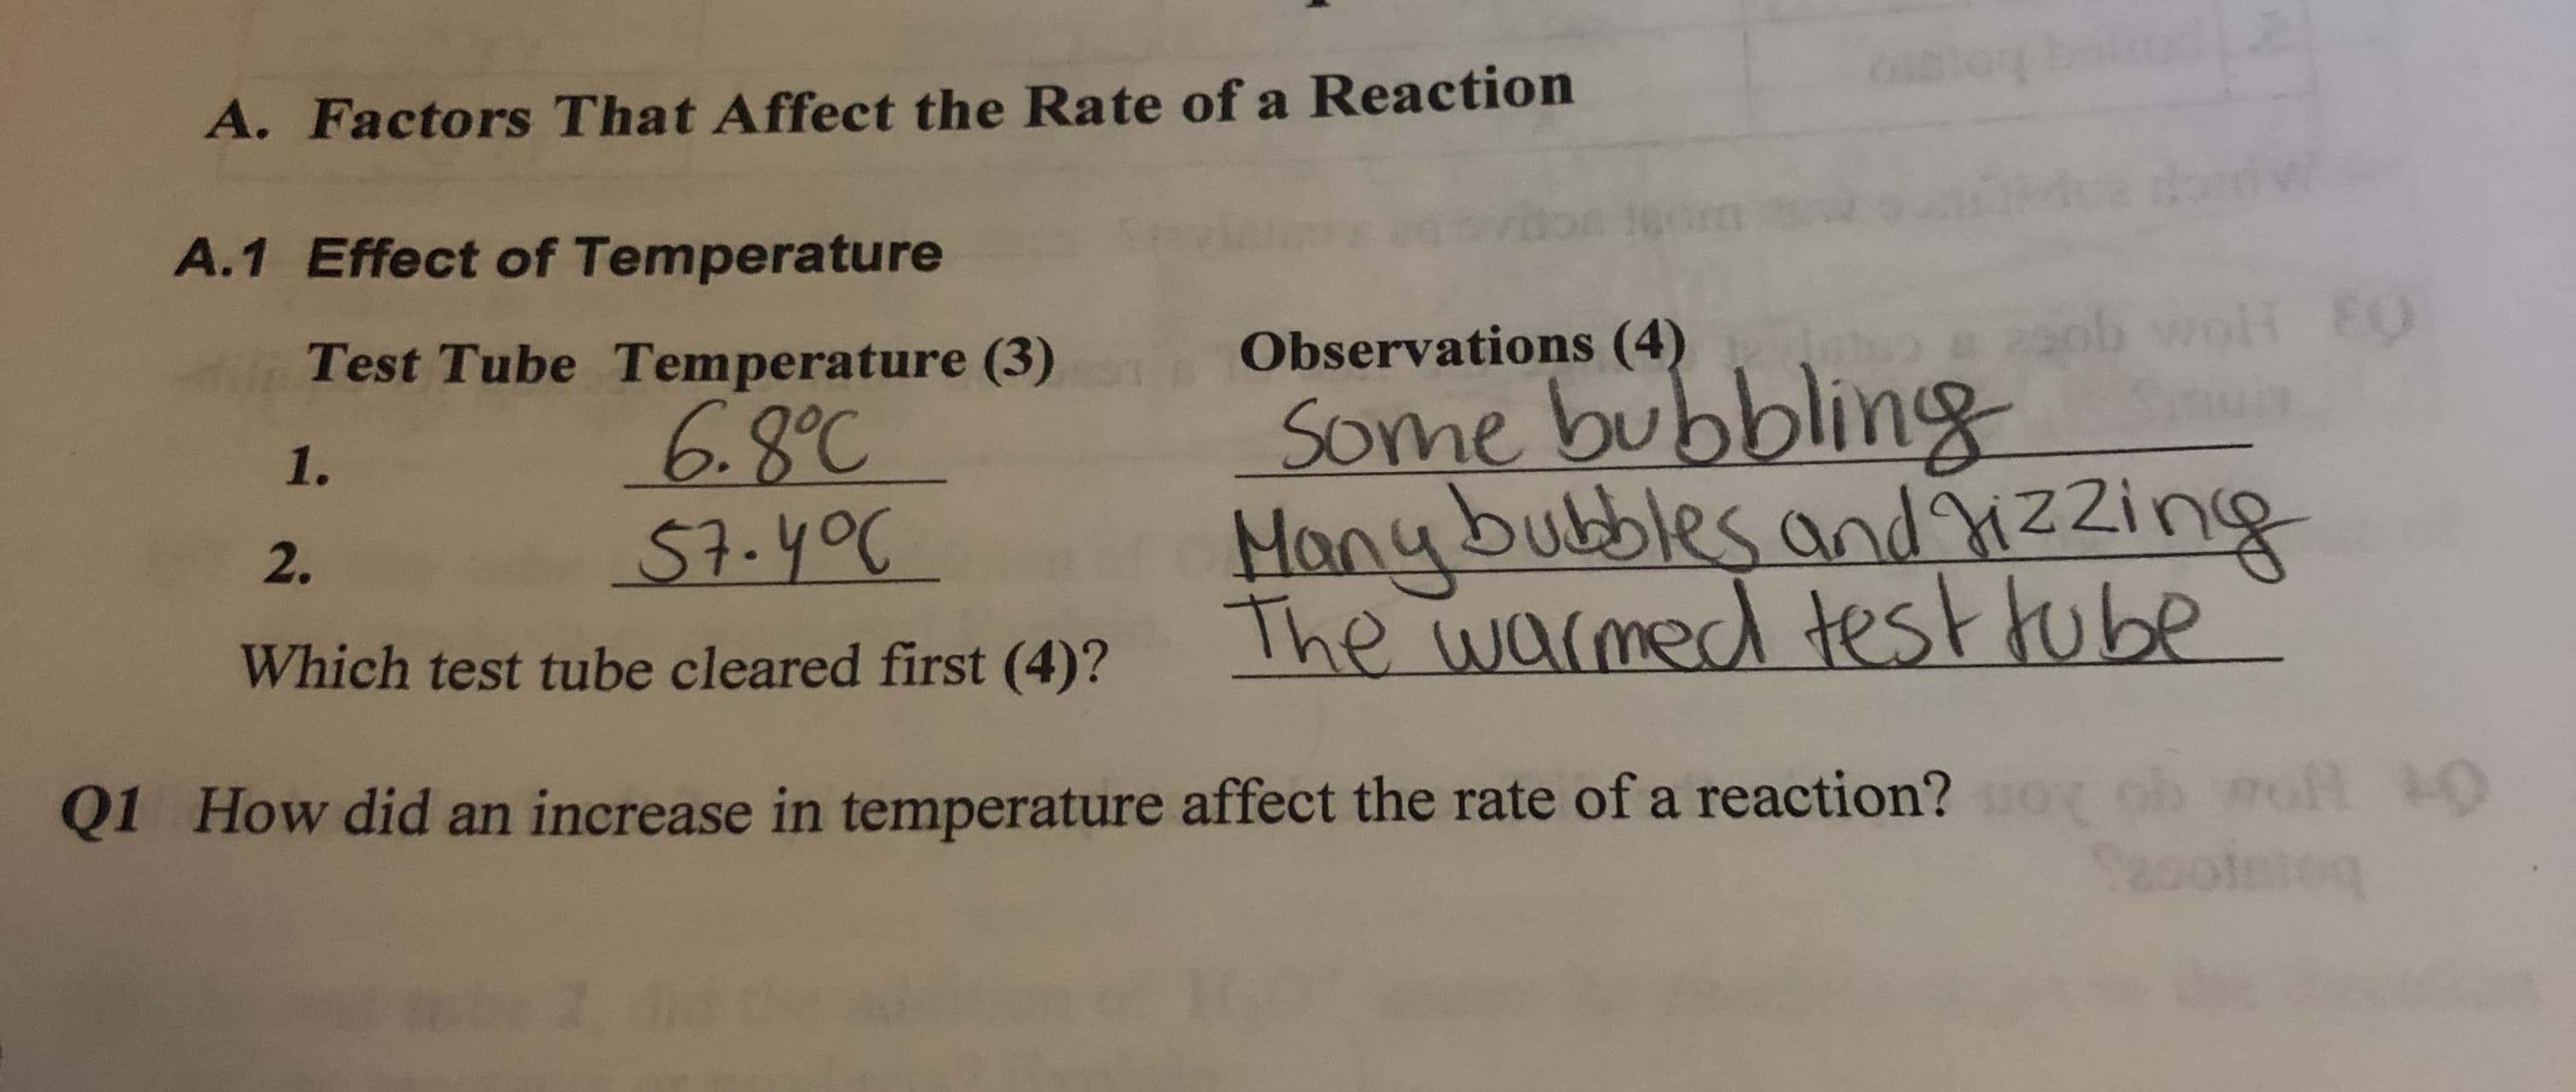 Q1 How did an increase in temperature affect the rate of a reaction?o
